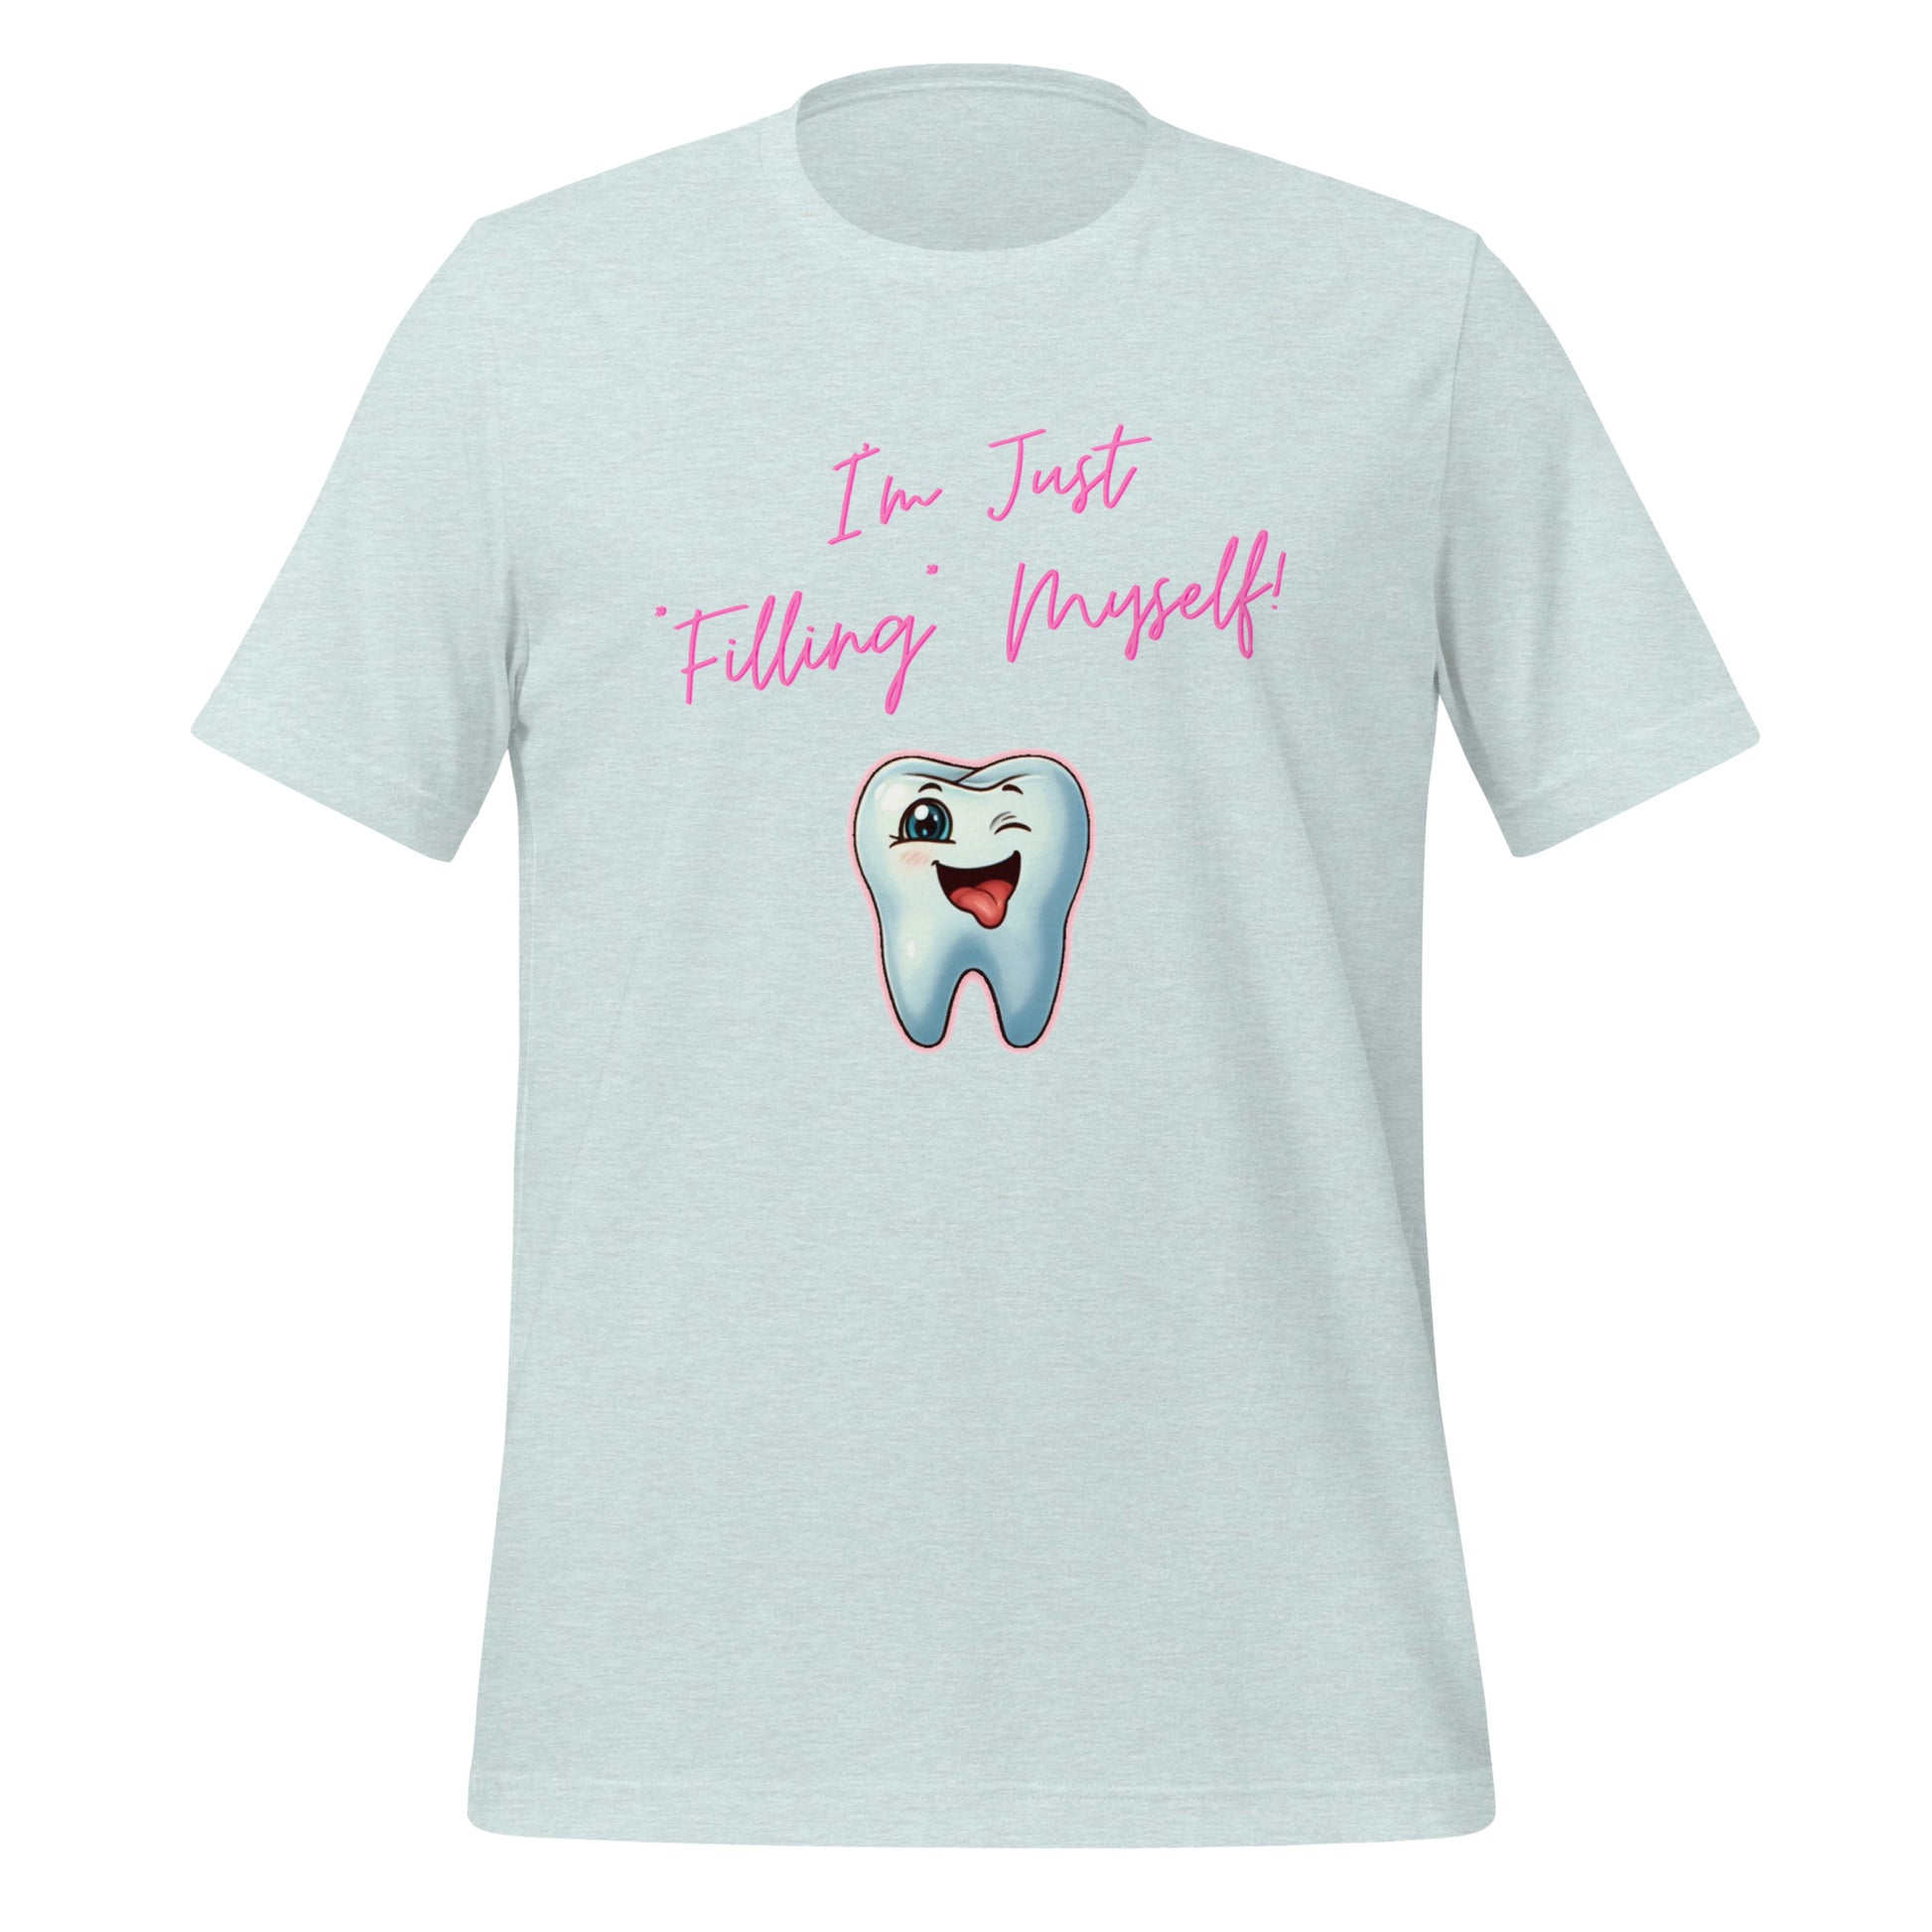 Flirtatious winking cartoon tooth character with the phrase "I'm just filling myself!" Ideal for a funny dental t-shirt or a cute dental assistant shirt. Heather prism ice blue color. 